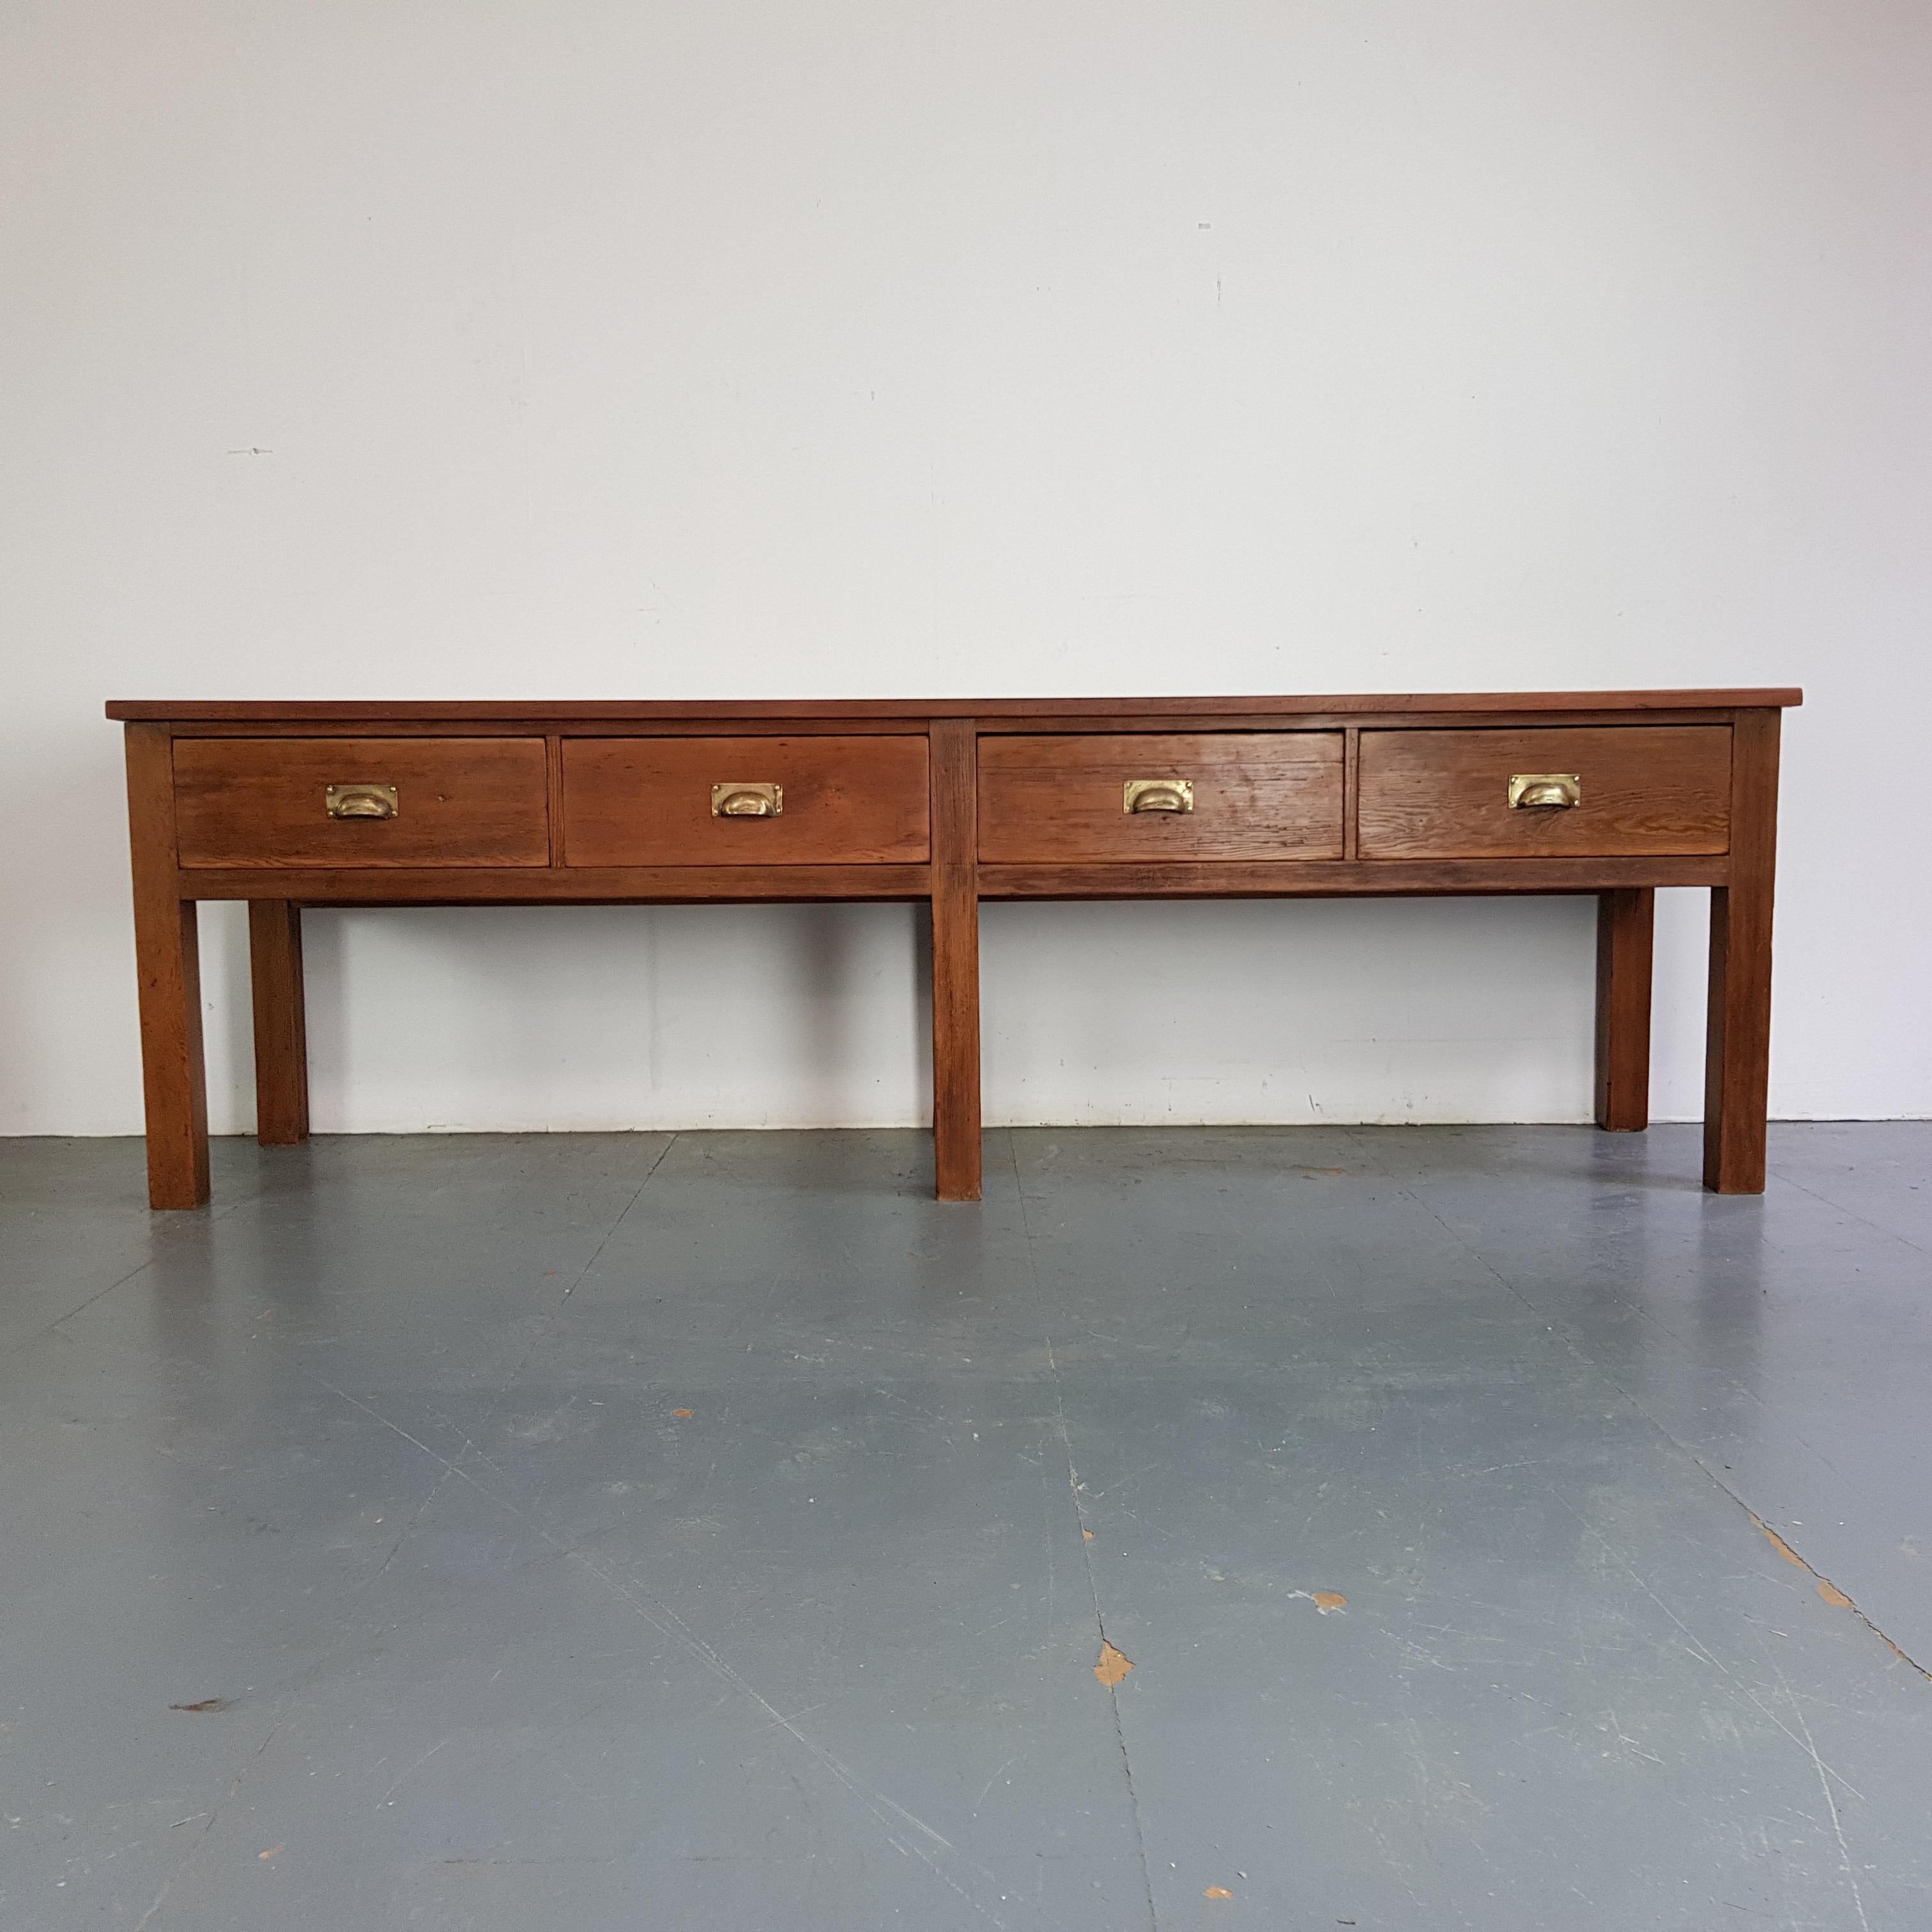 Lovely early 20th century very large pine lab bench salvaged from a boys' public school.  Great as a console table in a hallway, or in a dining room.  Would also look amazing in a kitchen. It has pigeon holes in the back so it can be completely